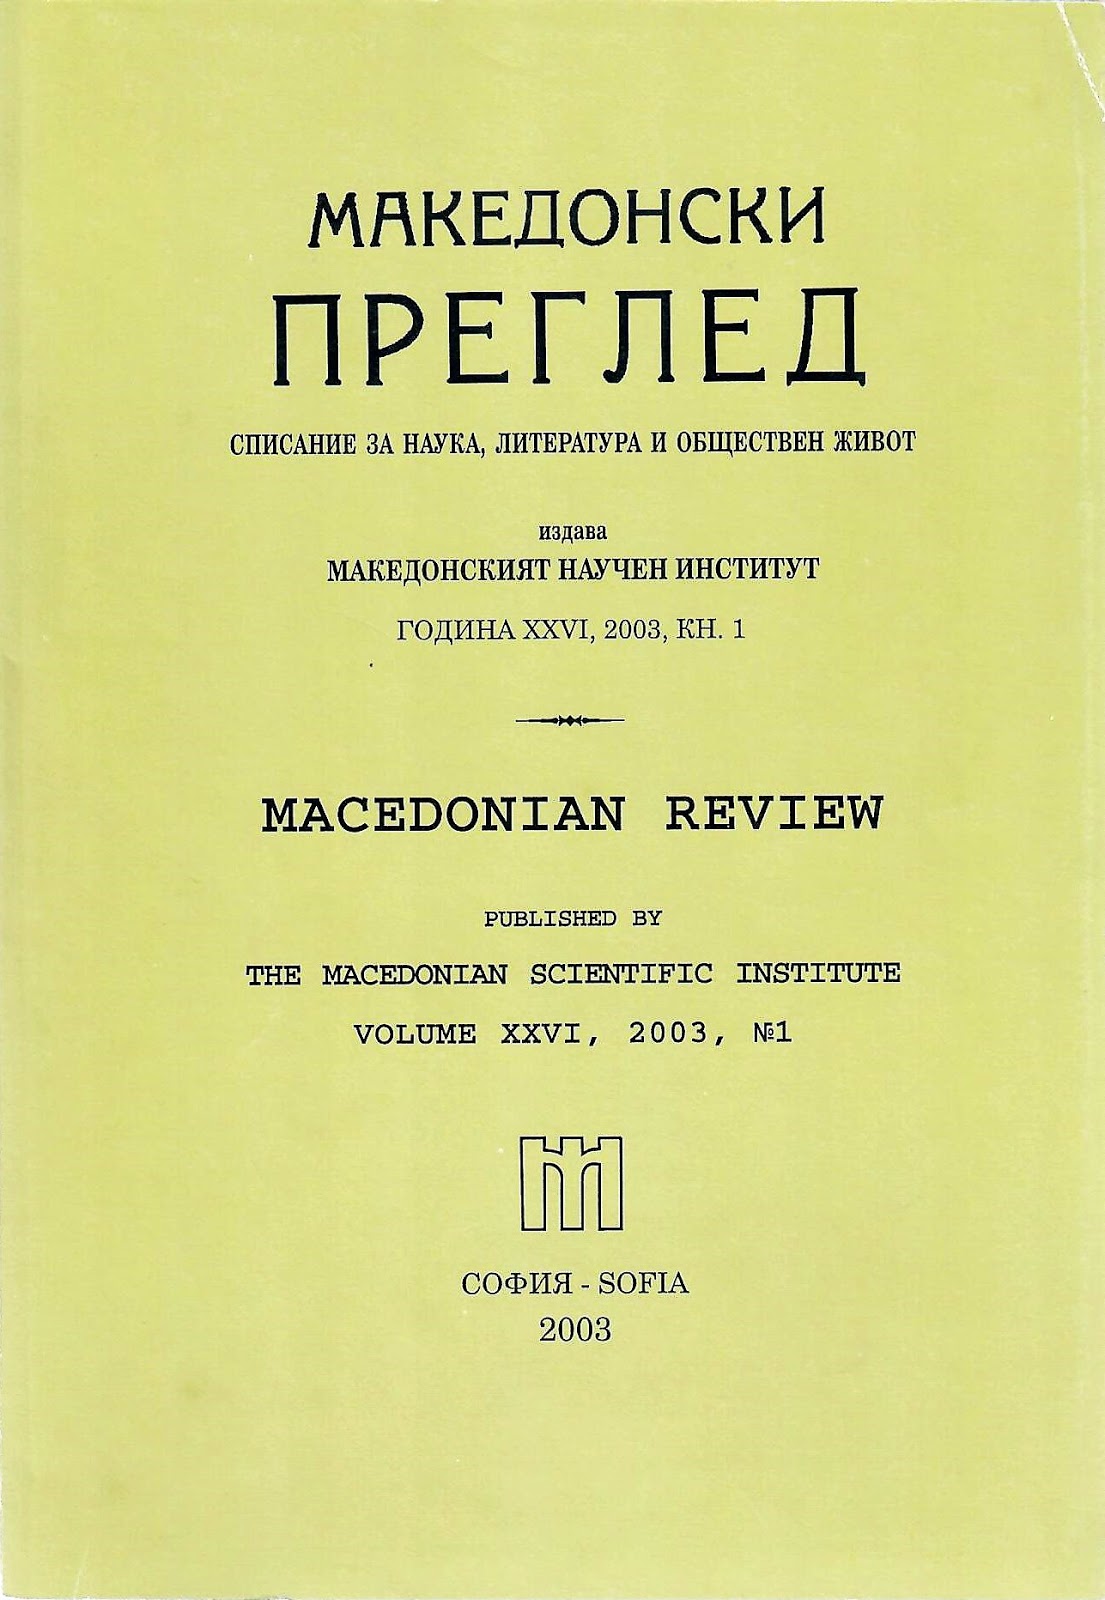 The Beginning of a Reassessment of Bulgarian Policy 
Regarding the Macedonian Question between 1948 and 1963 Cover Image